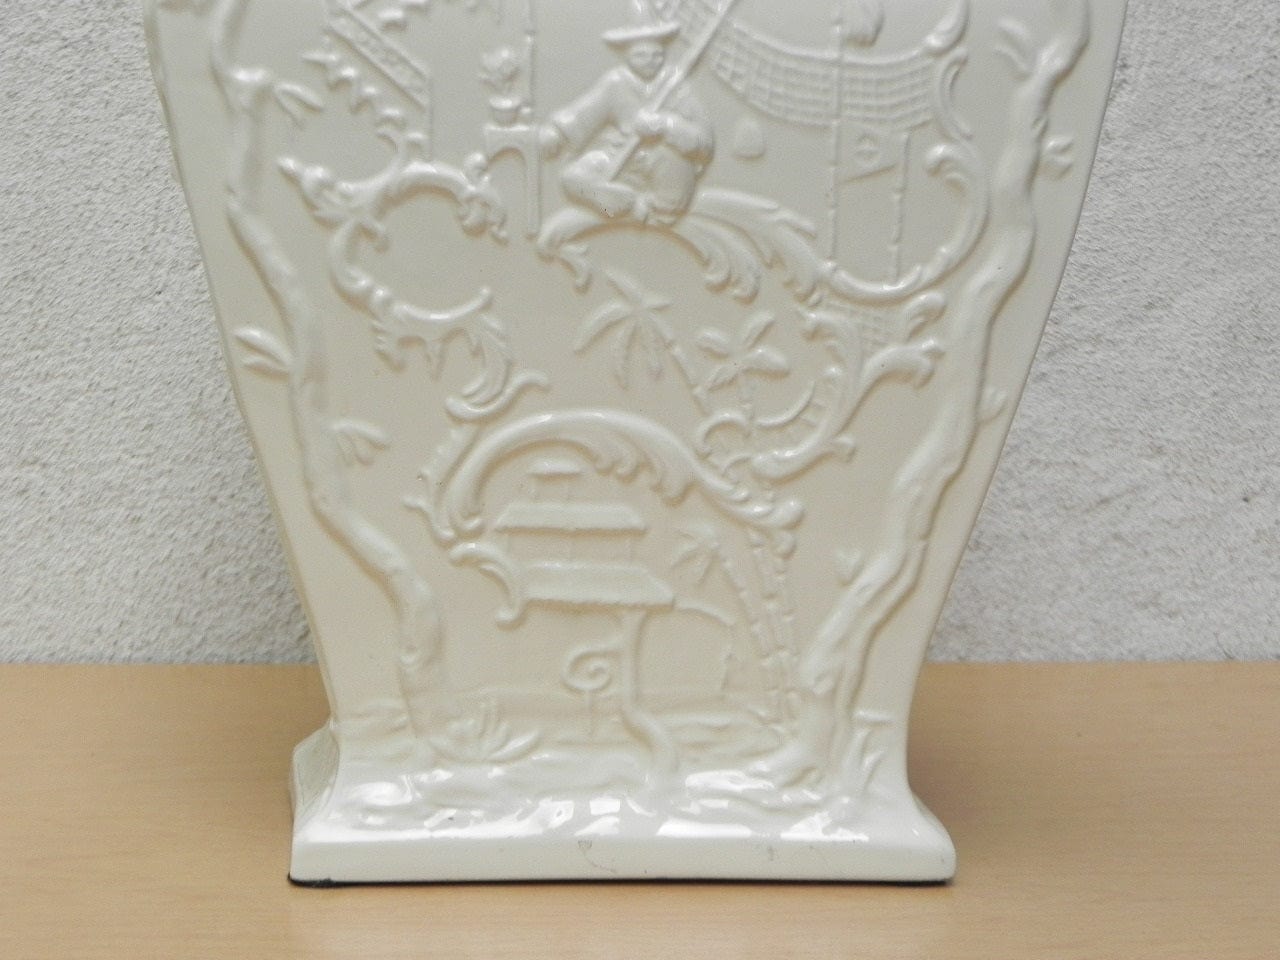 I Like Mikes Mid Century Modern Vases Large Creamy White Porcelain with Chinese Scenes